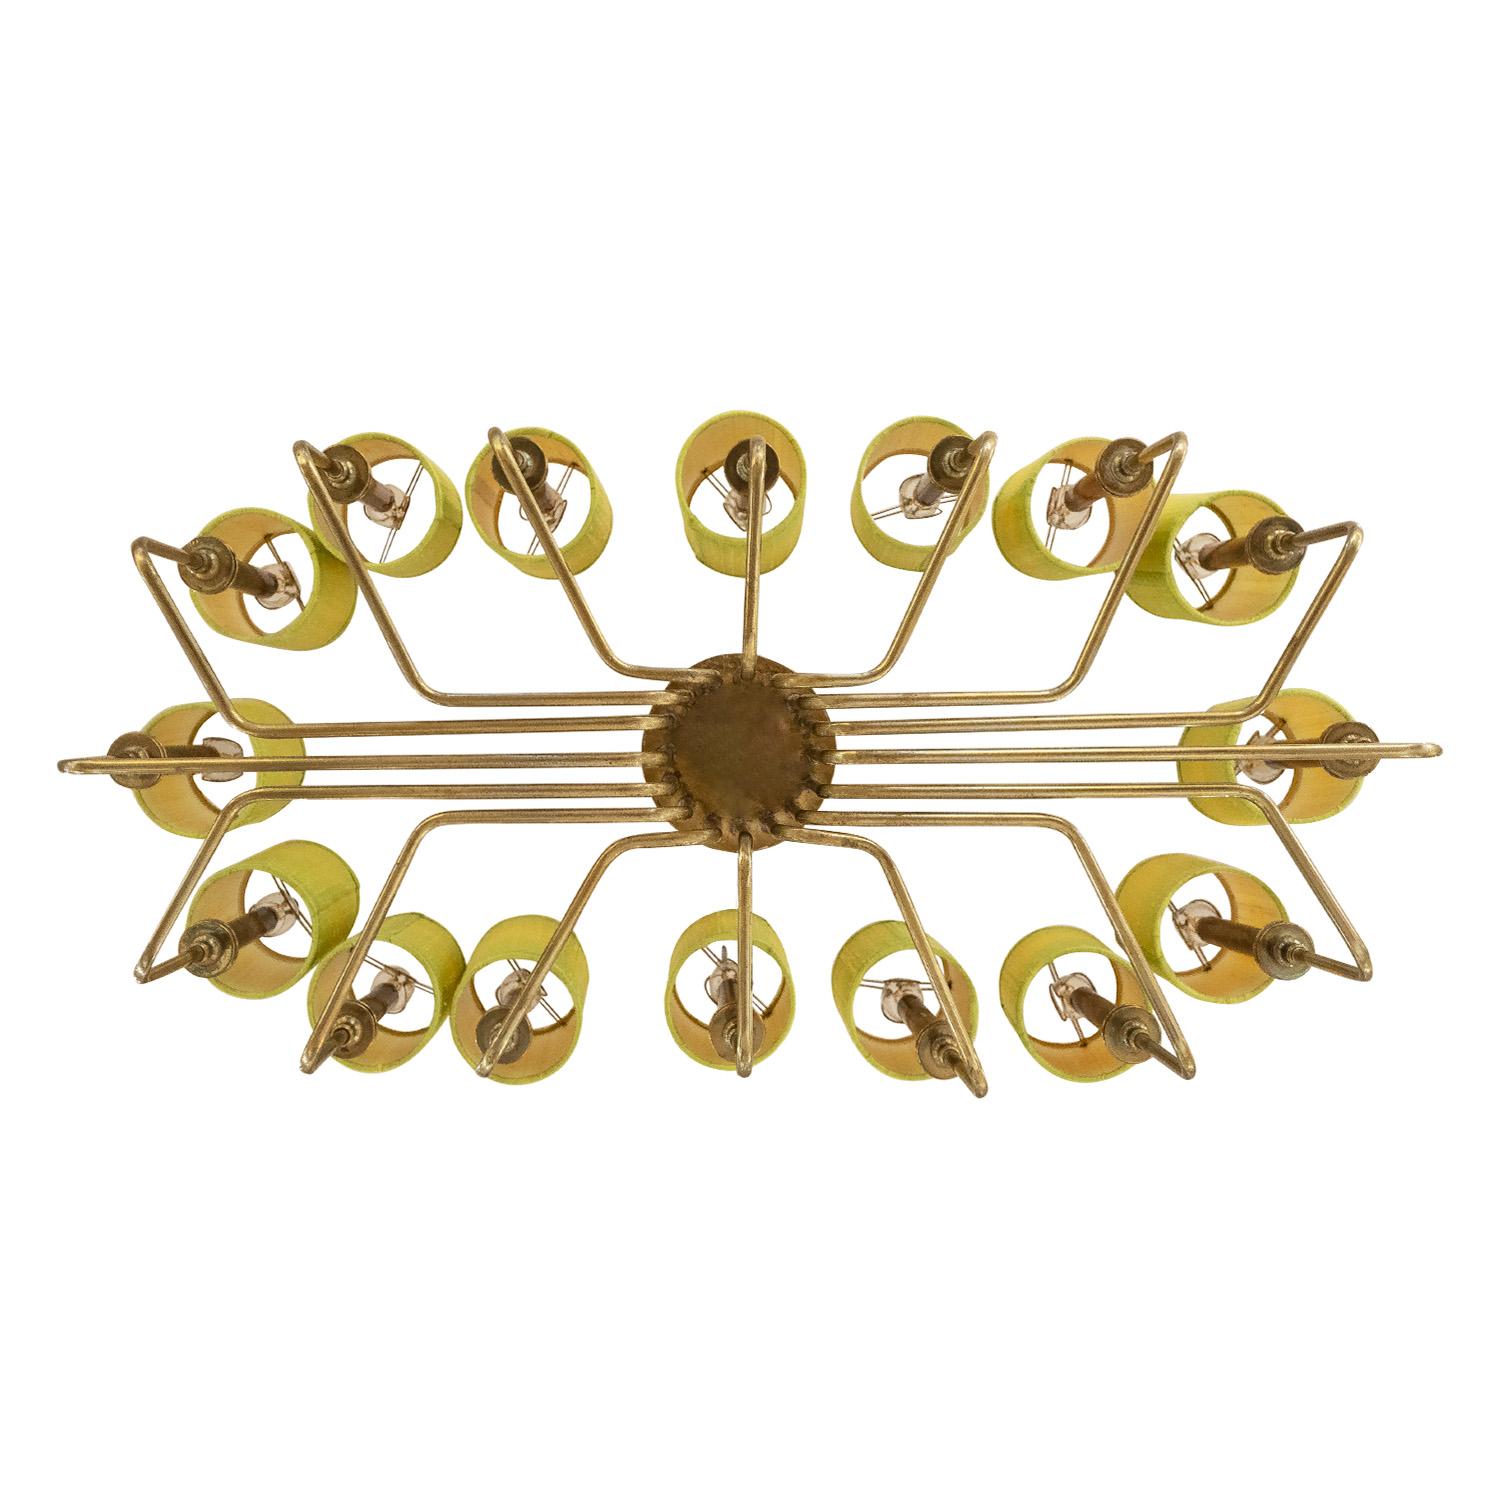 Hand-Crafted Parzinger Style Large and Impressive Chandelier in Brass, 1950s For Sale